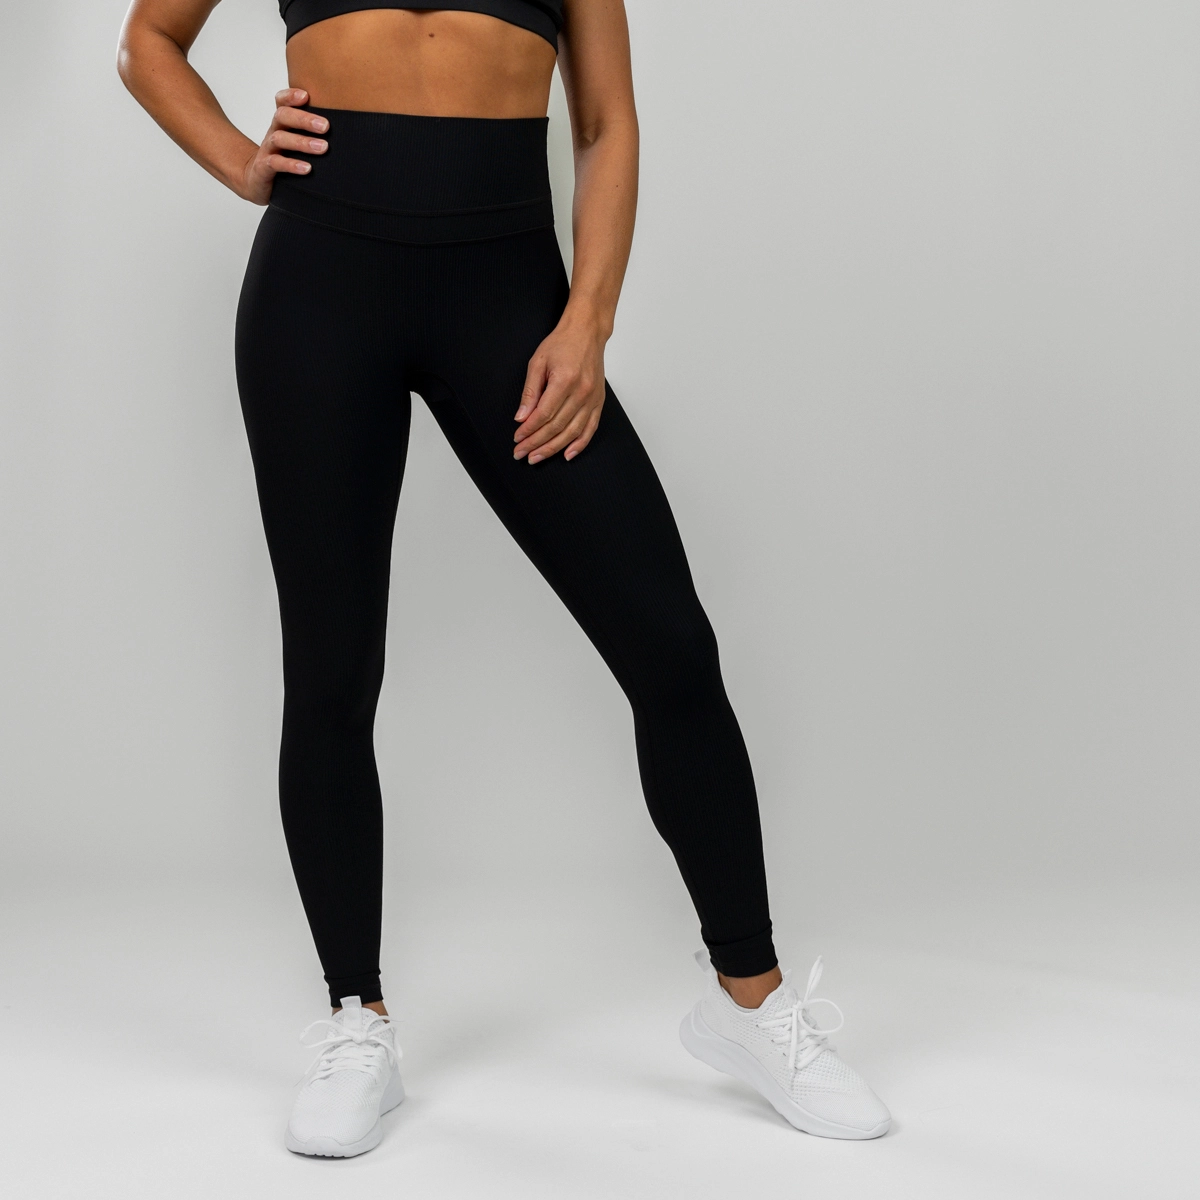 Scrunch Leggings - Curve Enhancing With Wide Waist Band